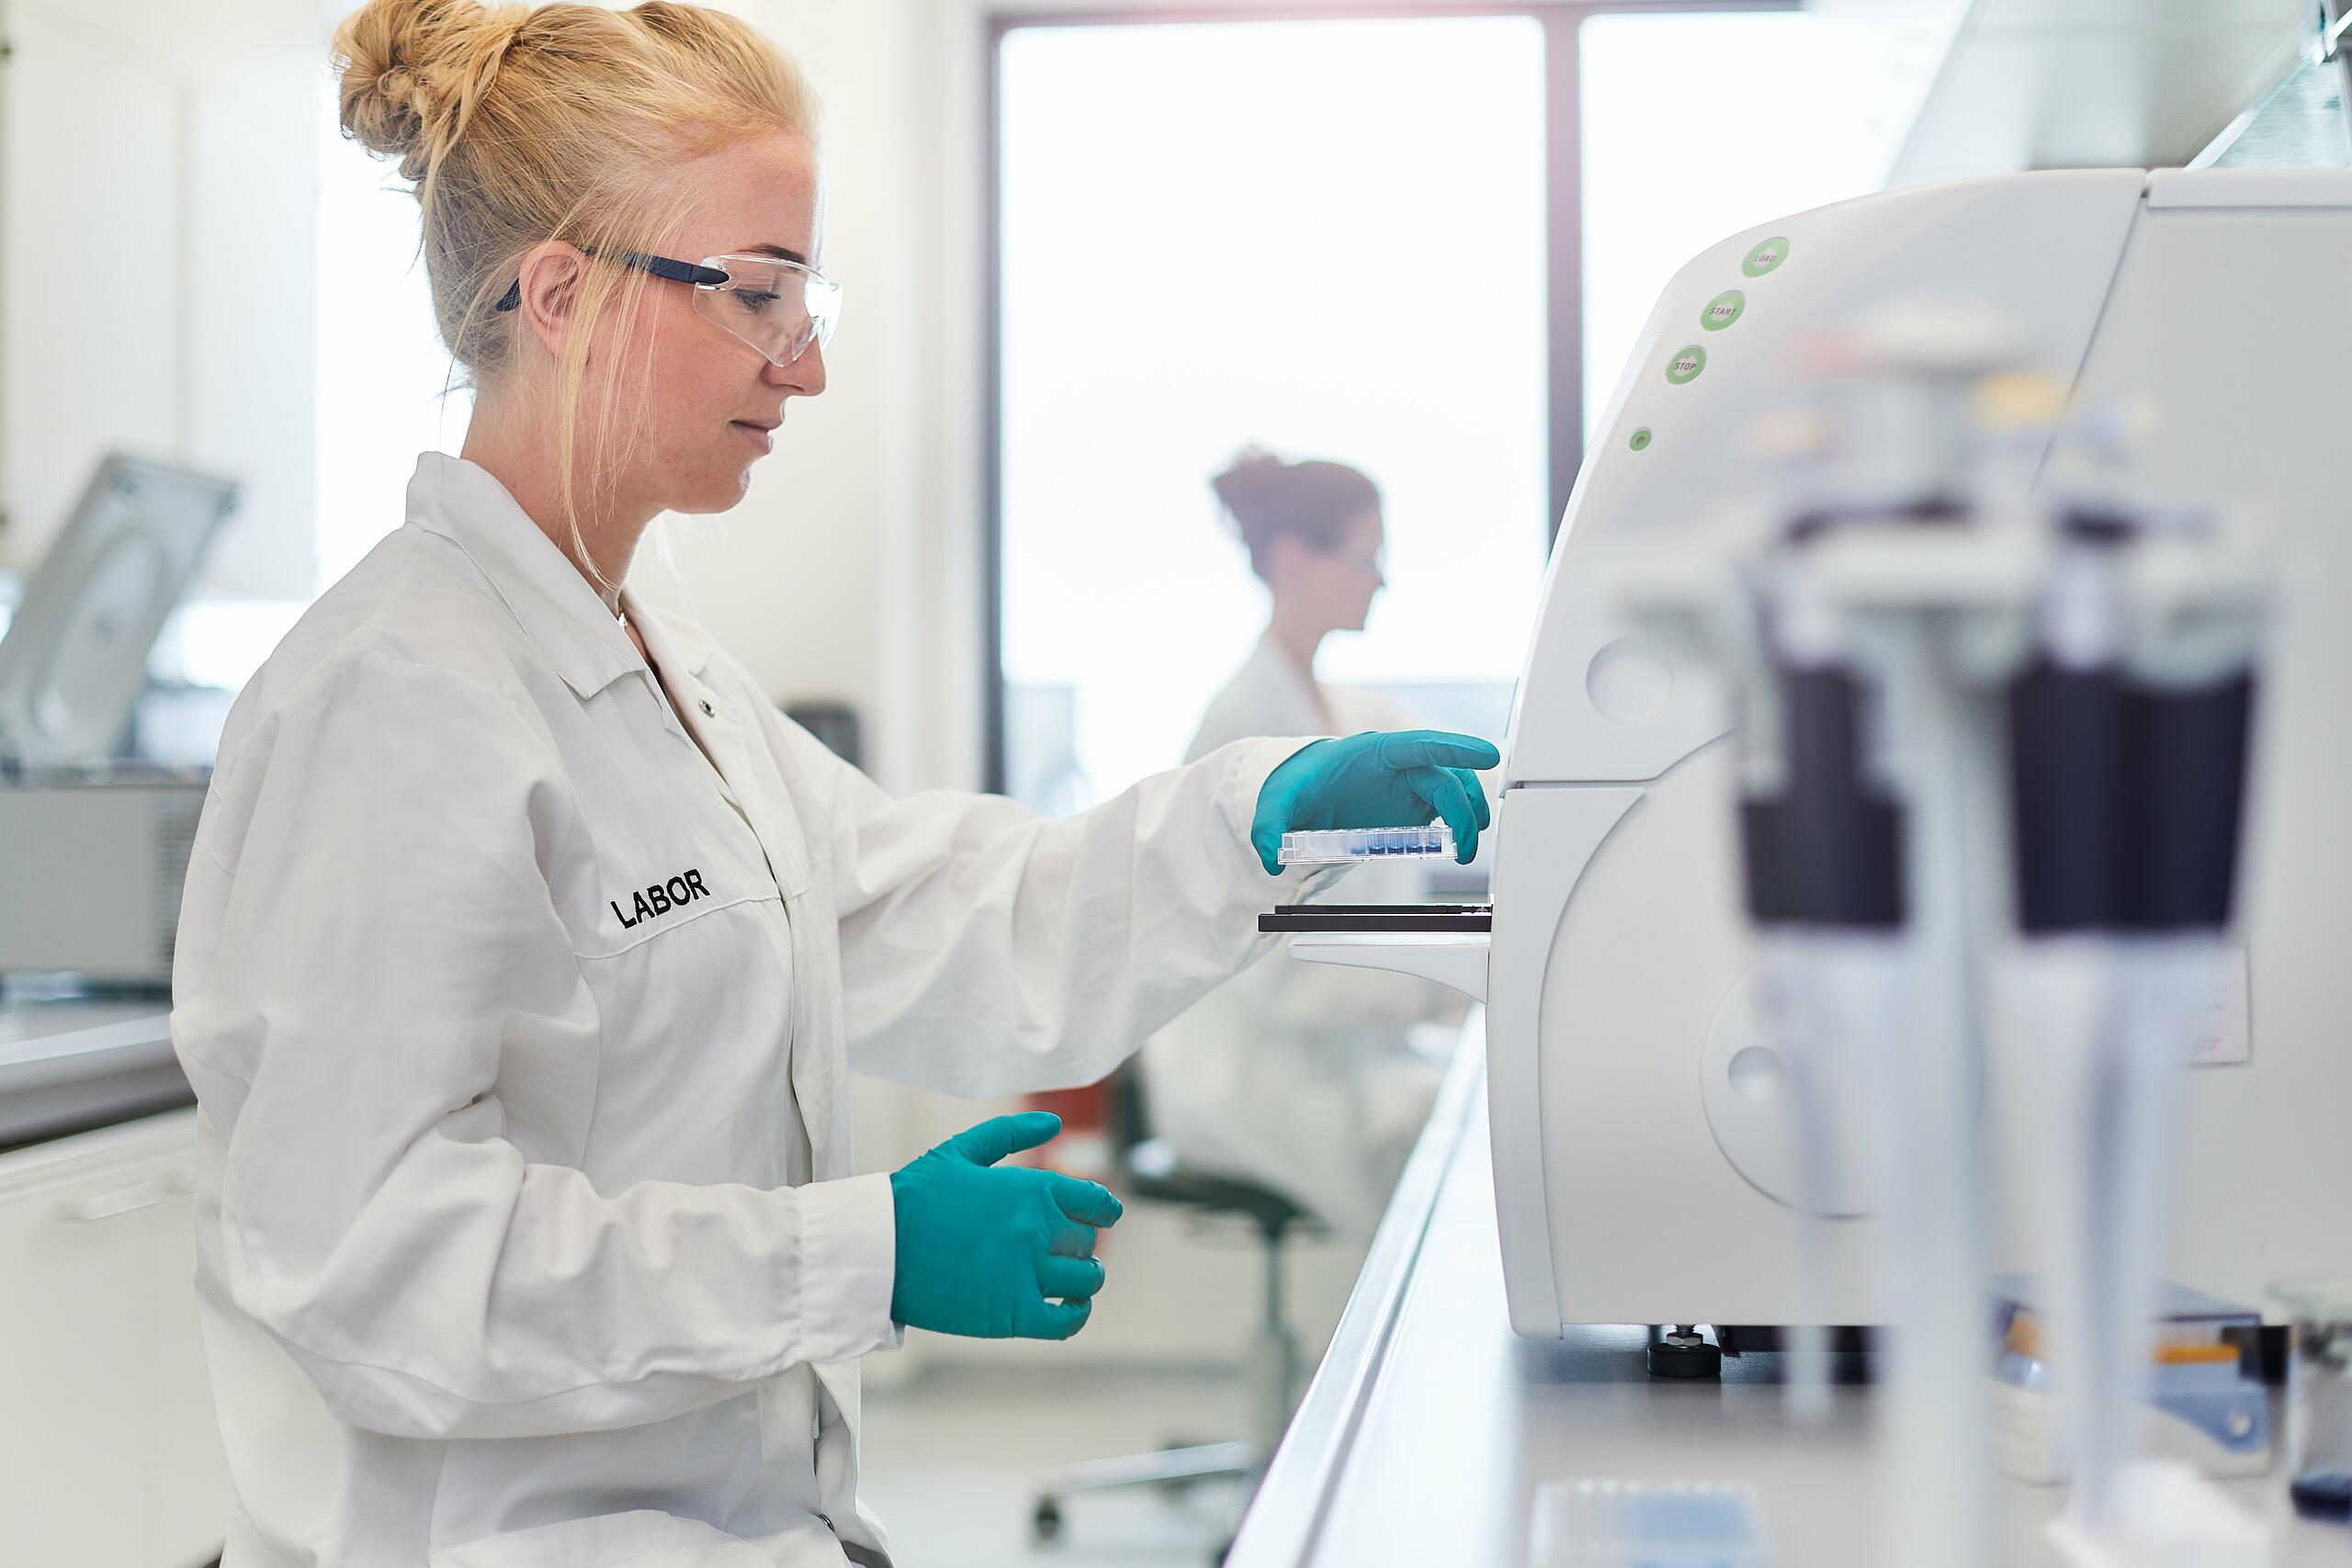 Women in analytical science laboratory has discovered a solution which enables a efficient and sequence-specific ID determination.